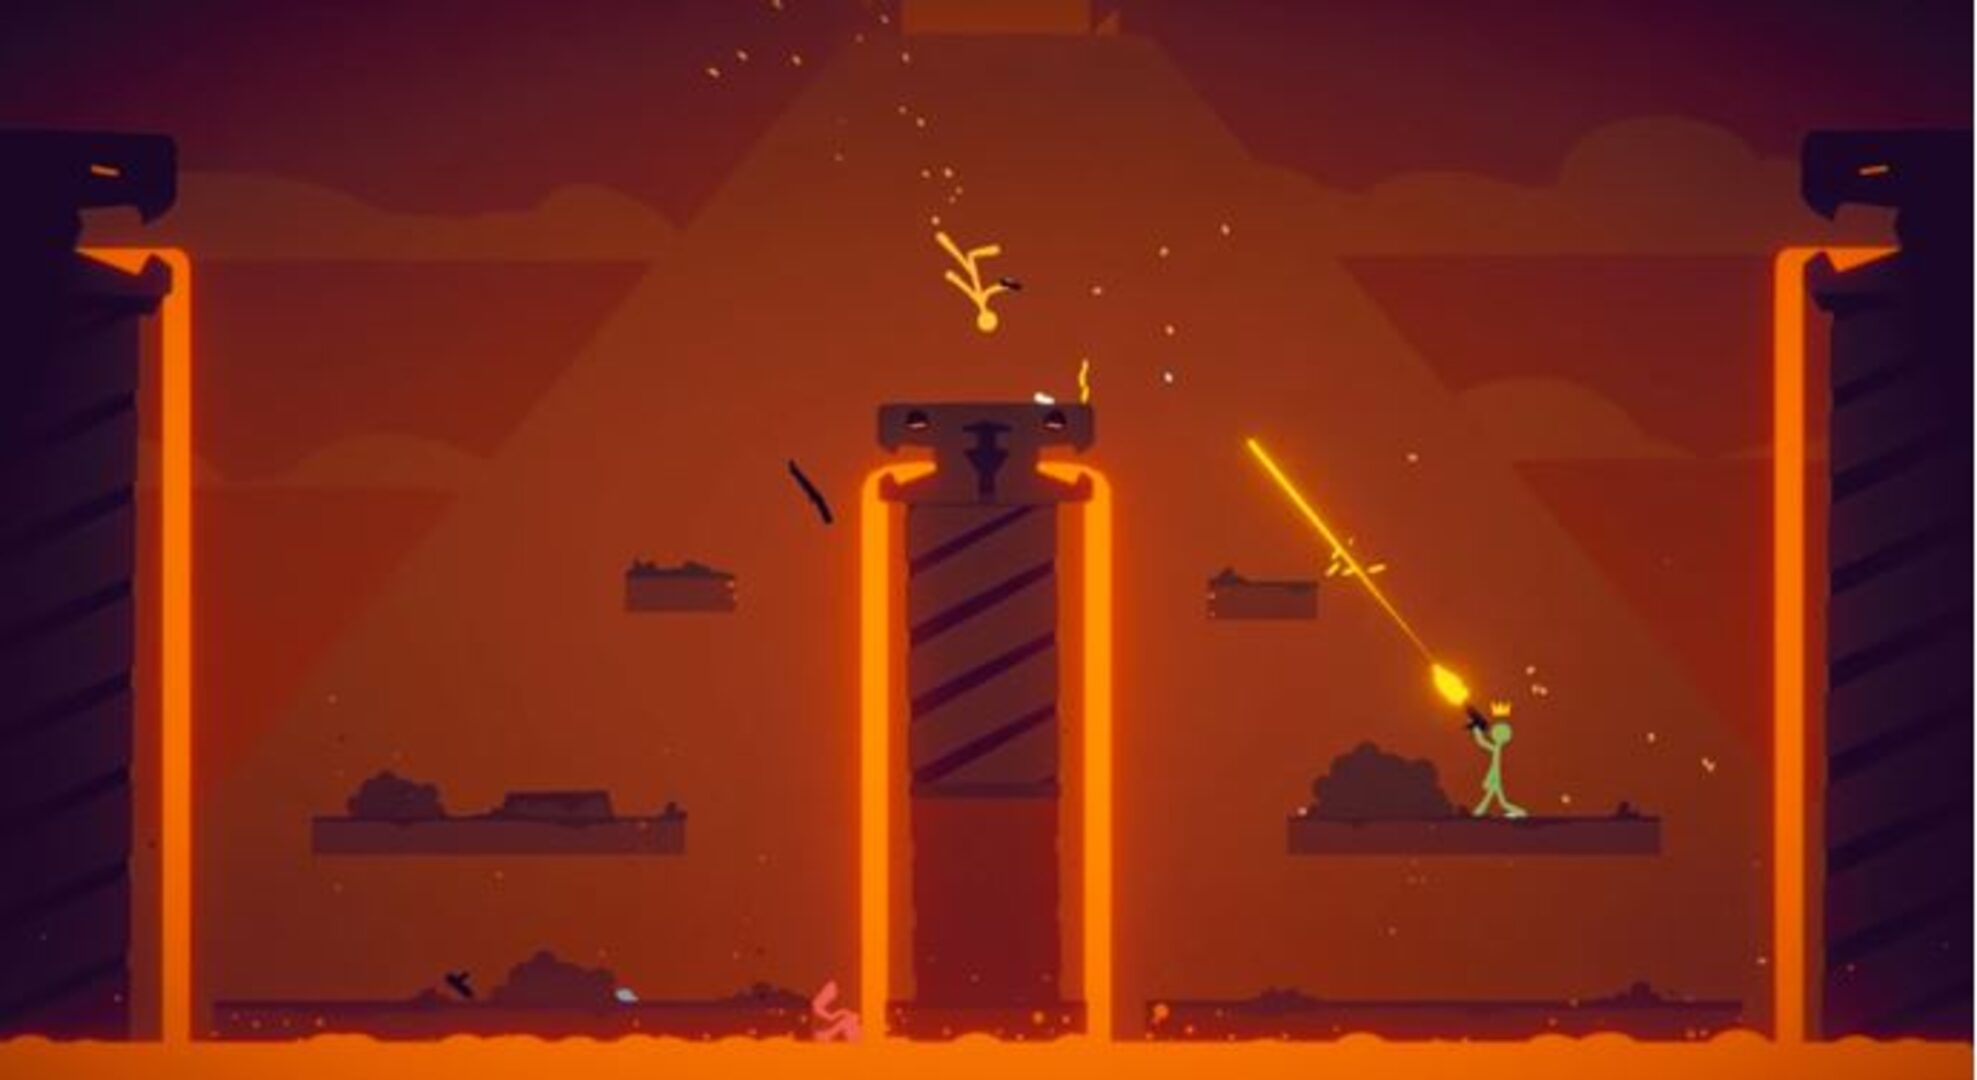 Stick Fight: The Game PC